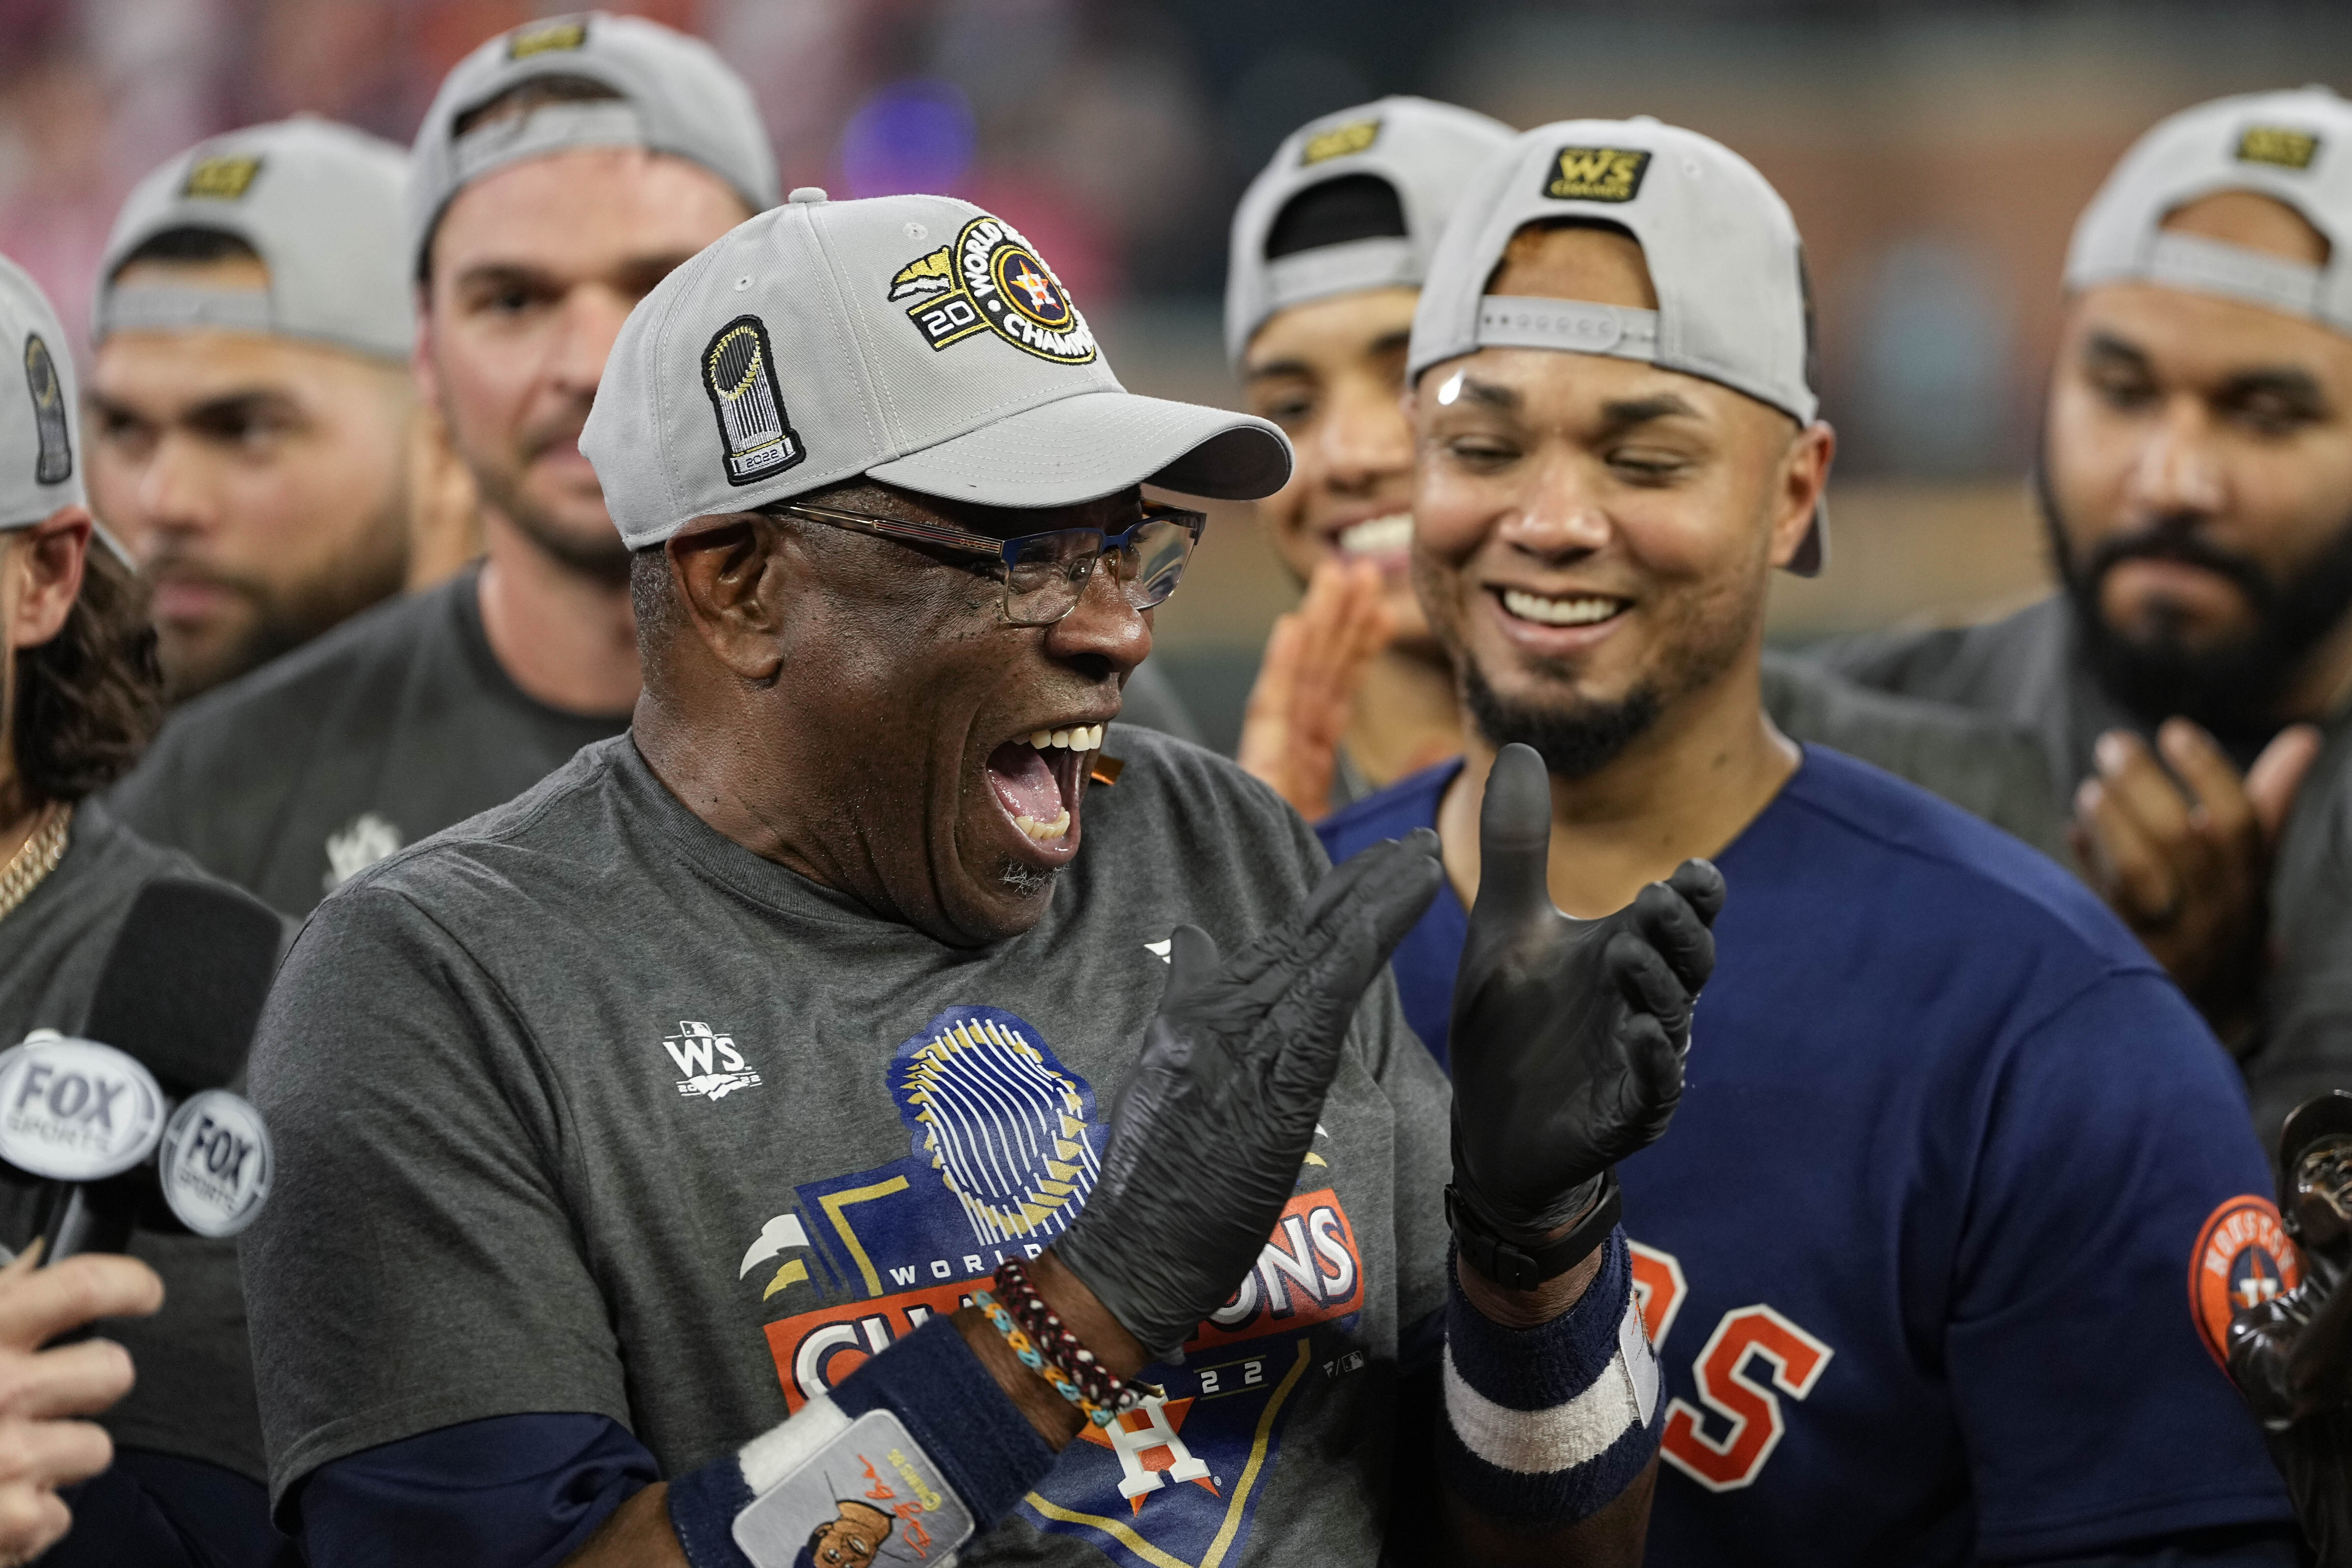 After 2,144 wins, Dusty Baker finally gets the World Series party